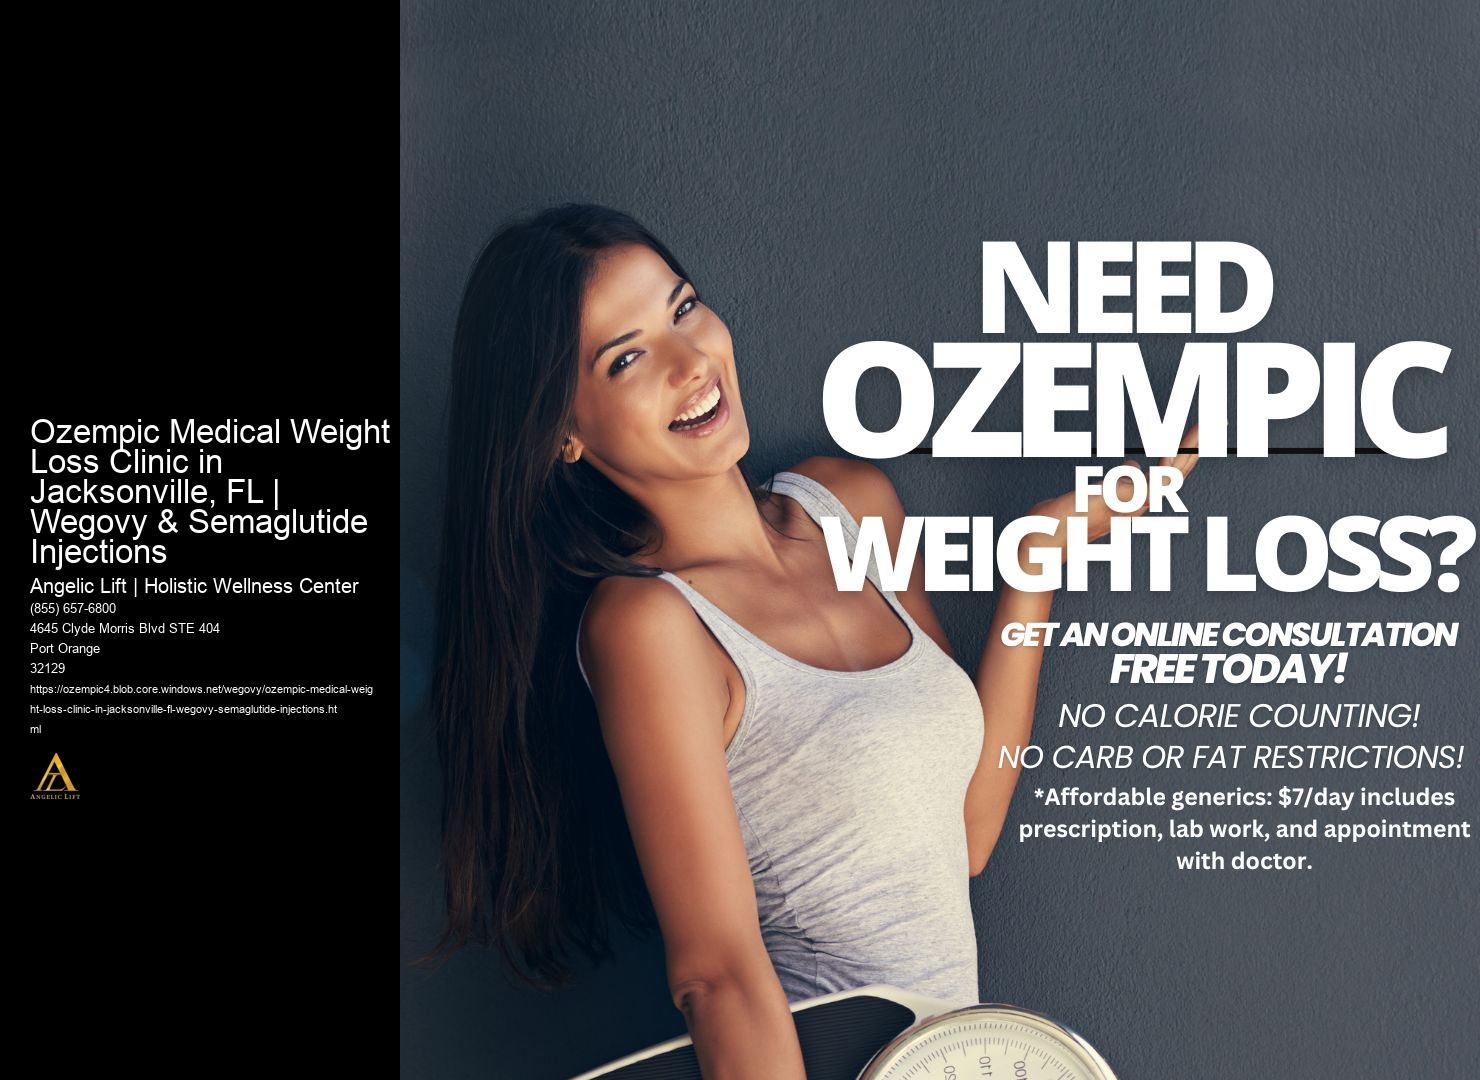 Ozempic Medical Weight Loss Clinic in Jacksonville, FL | Wegovy & Semaglutide Injections